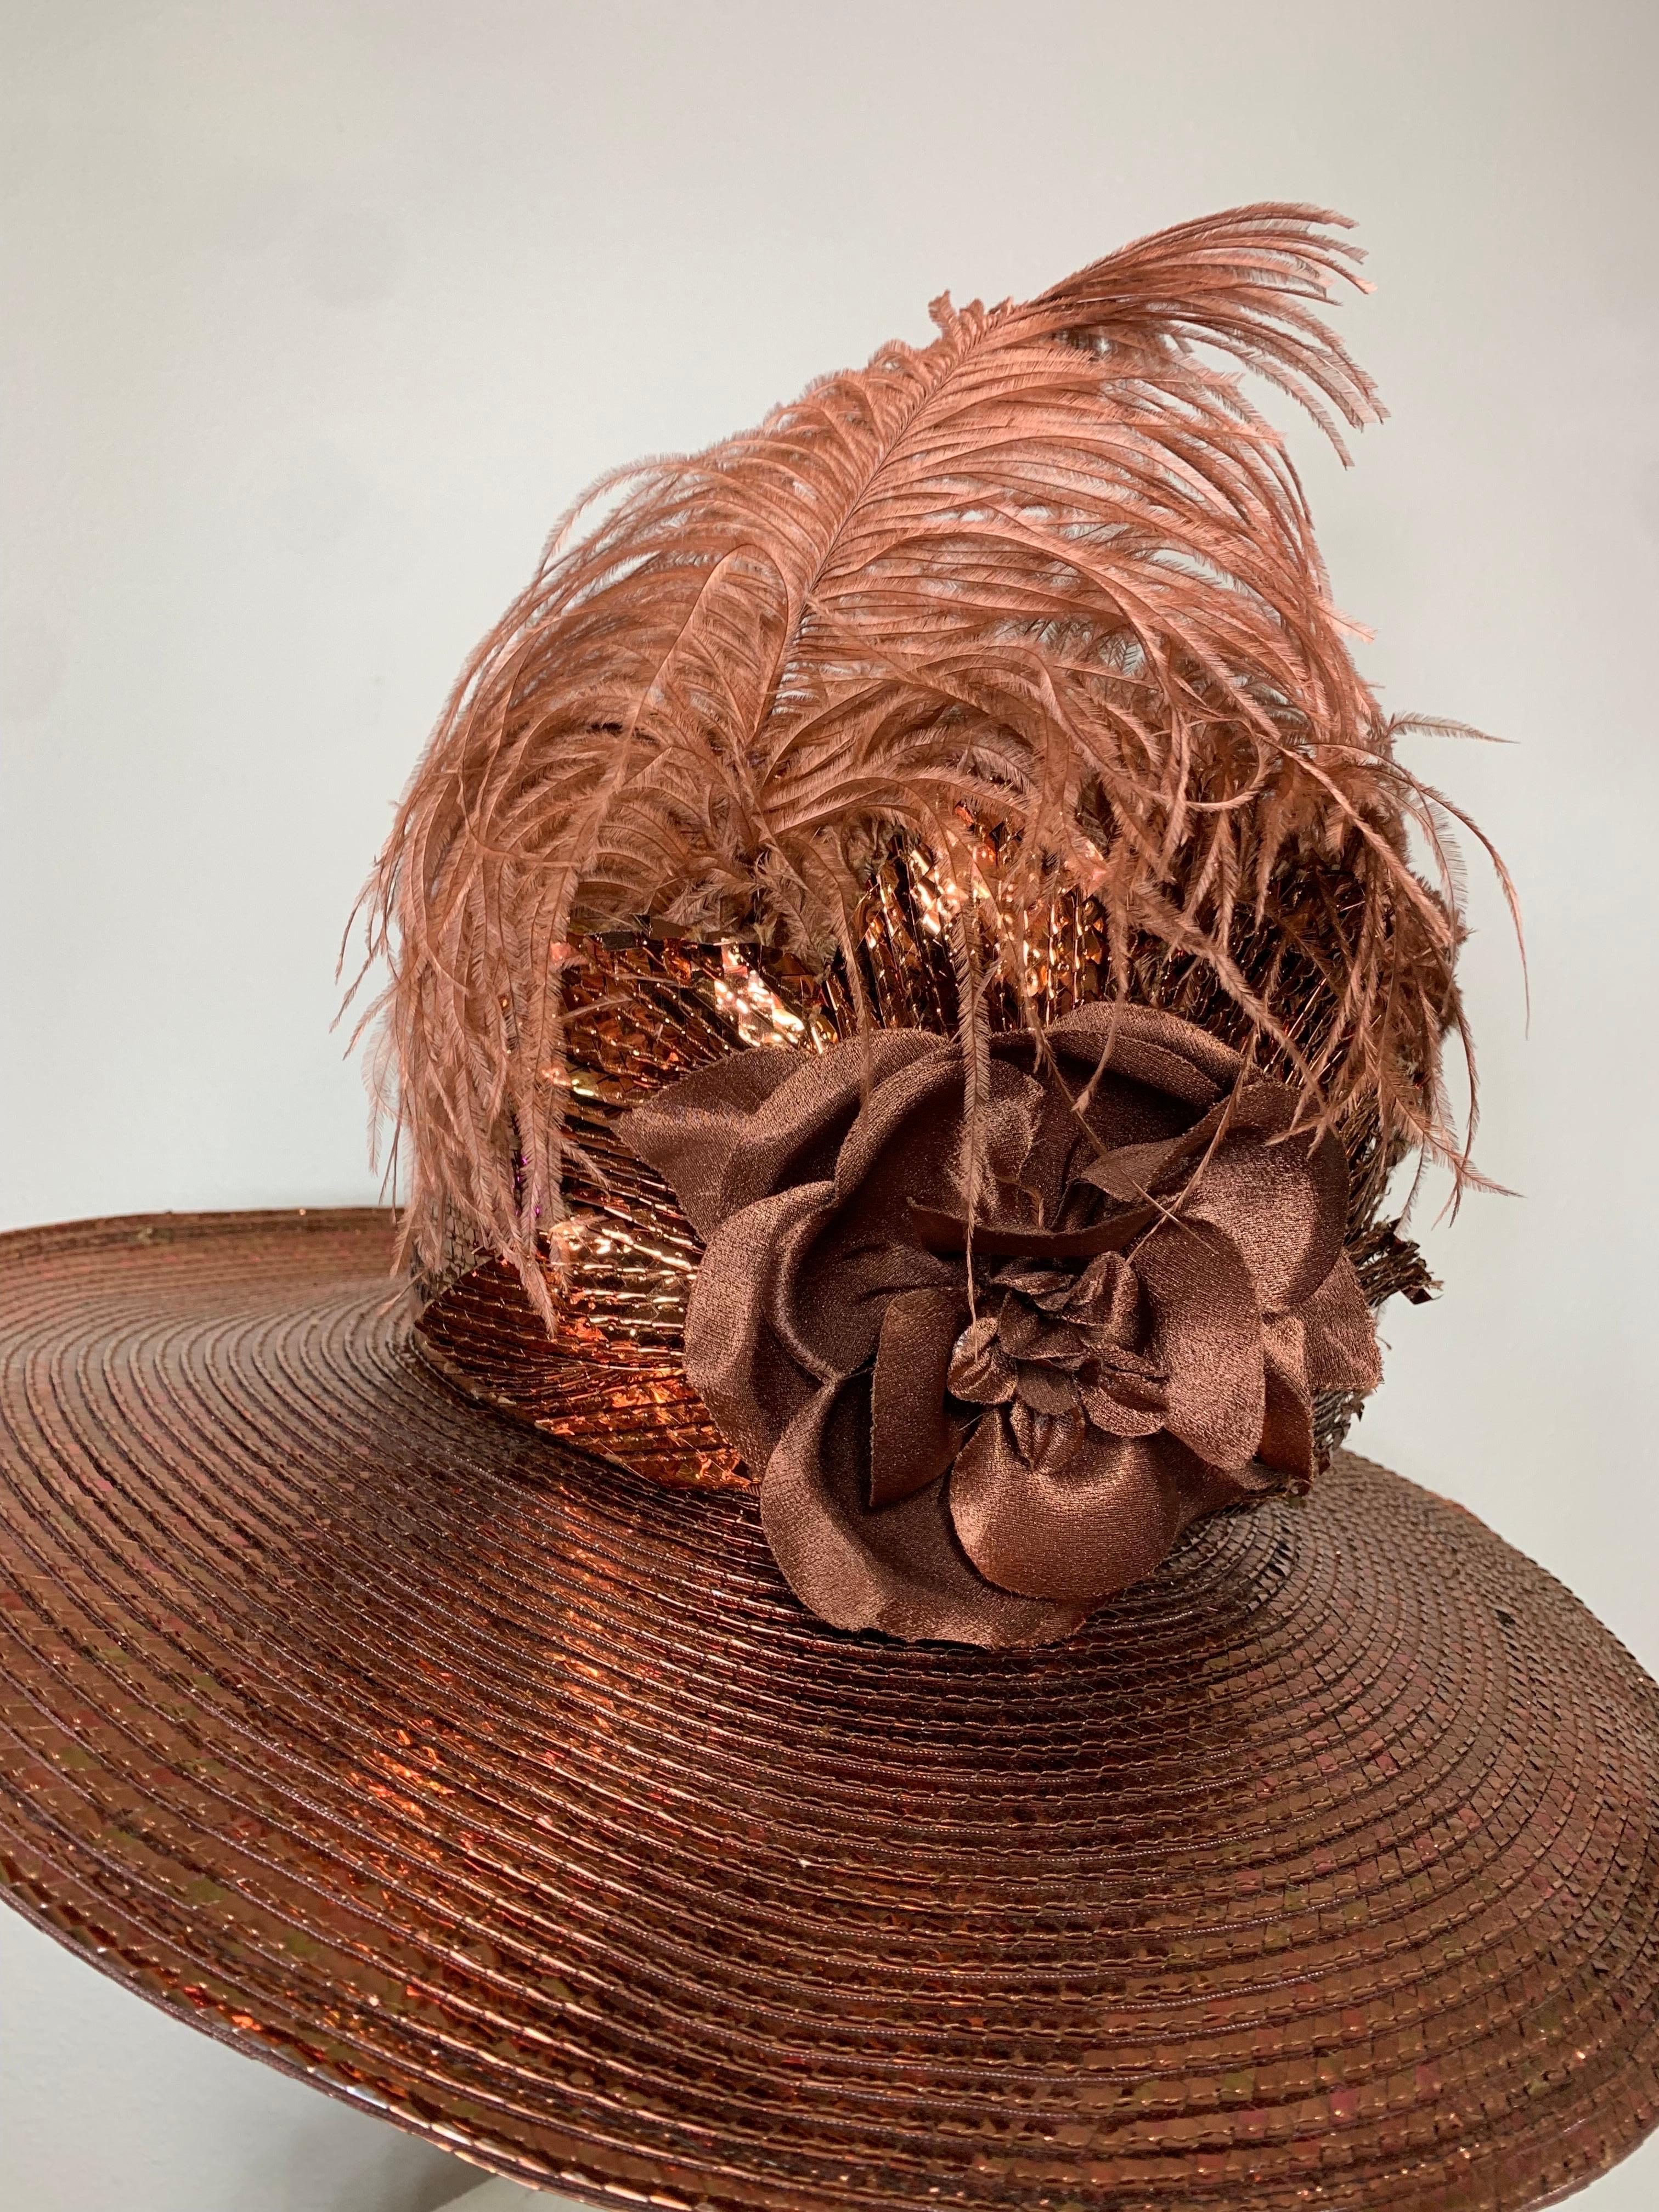 Custom Made Suzanne Couture Millinery Copper Straw Medium Brim Hat w Tall Crown Feathers & Silk Flowers:  Gleaming copper straw hat with slightly convex crown and wide layered hatband in contrasting ribbons. Ostrich feather accent with fabric floral